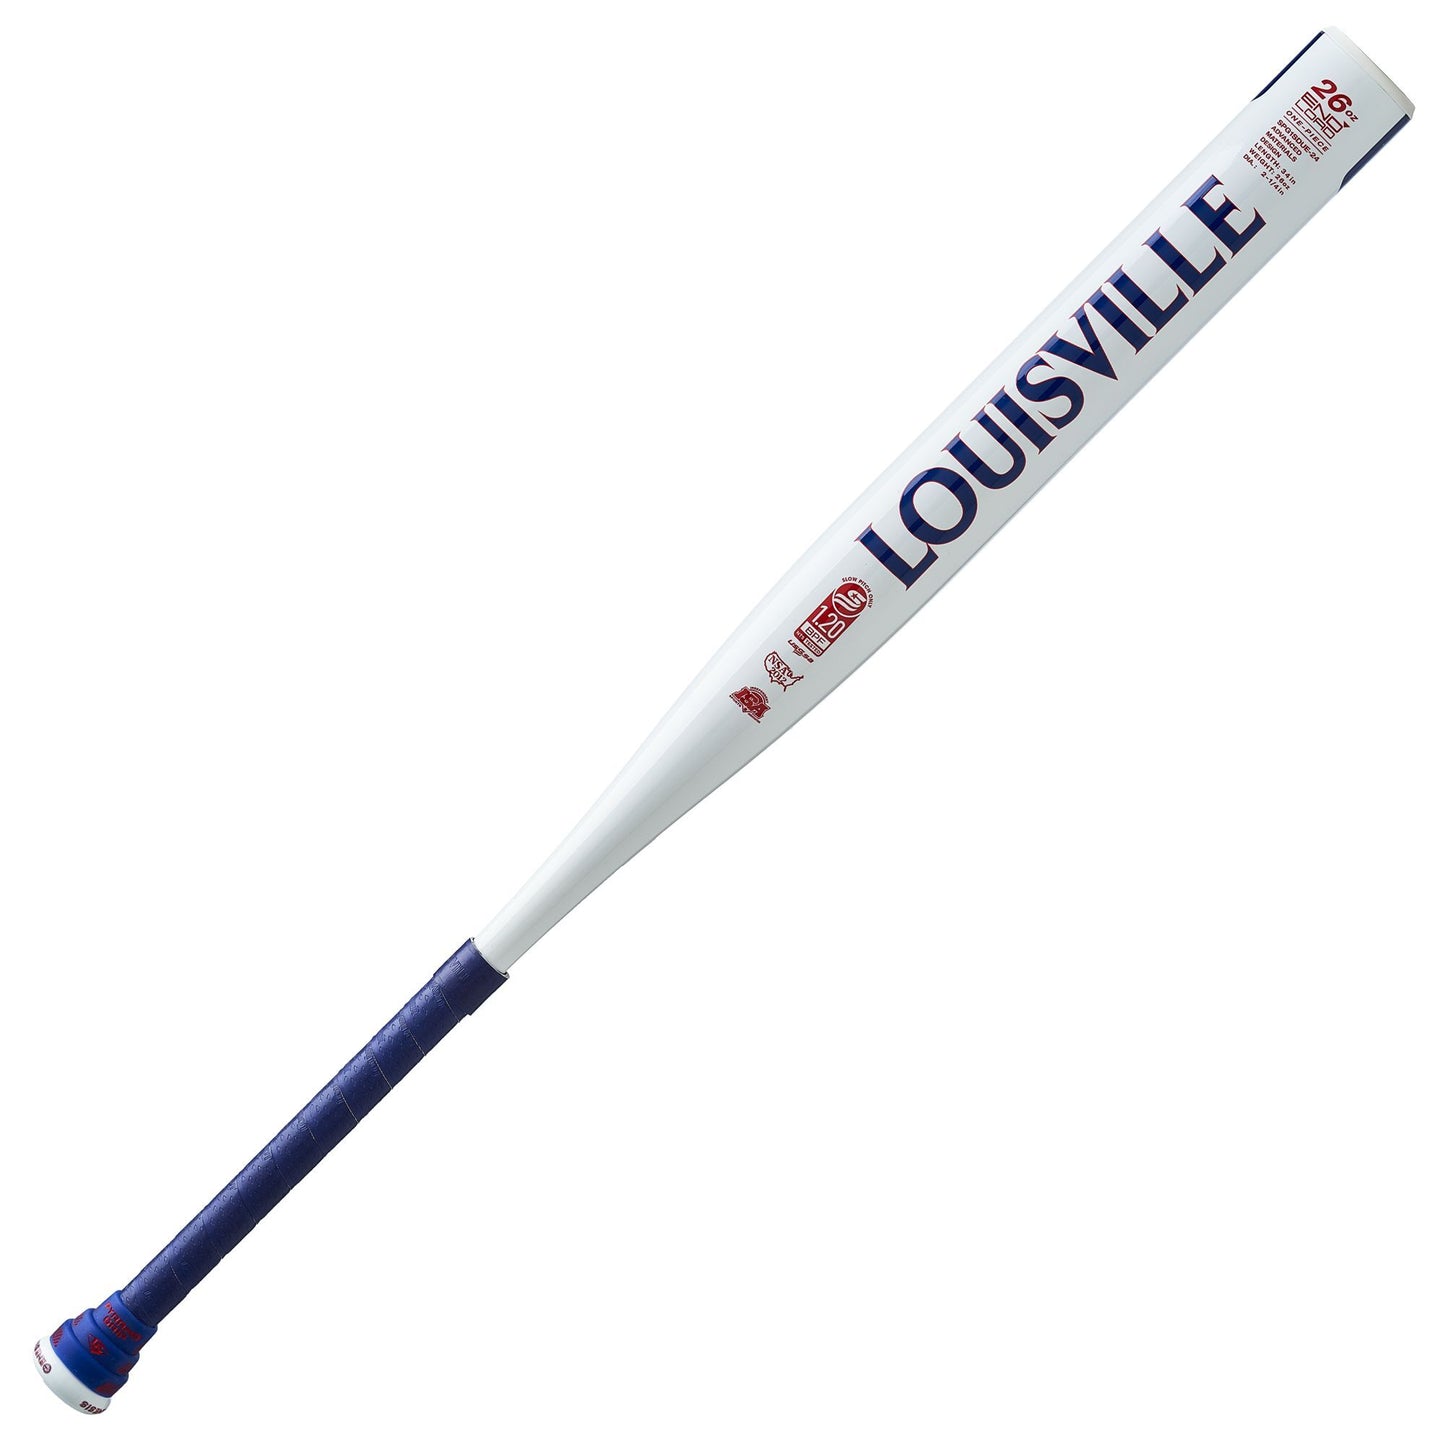 A photo of the Louisville Slugger 2024 Genesis 1 Piece End Load Slo-Pitch Bat - Source Exclusive in colour white with navy blue text LOUISVILLE writing